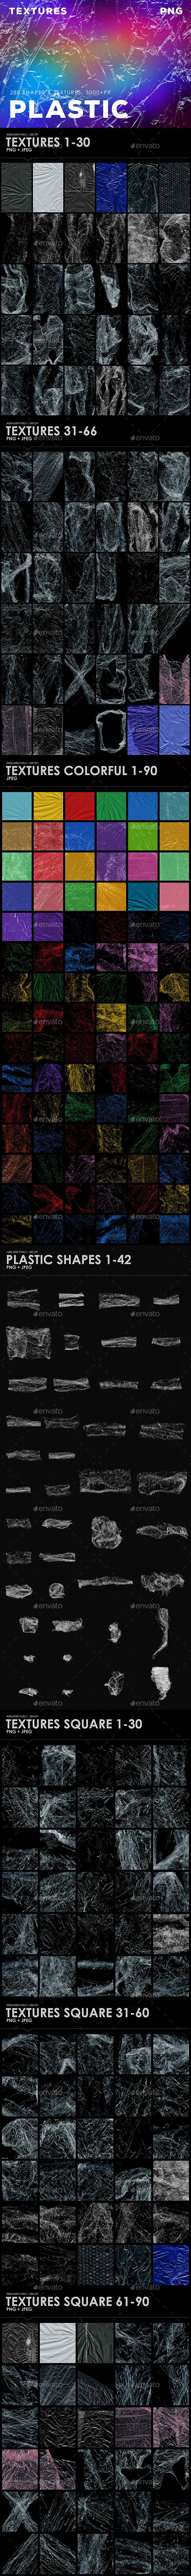 [DOWNLOAD]288 Plastic Overlays, Shapes, Textures